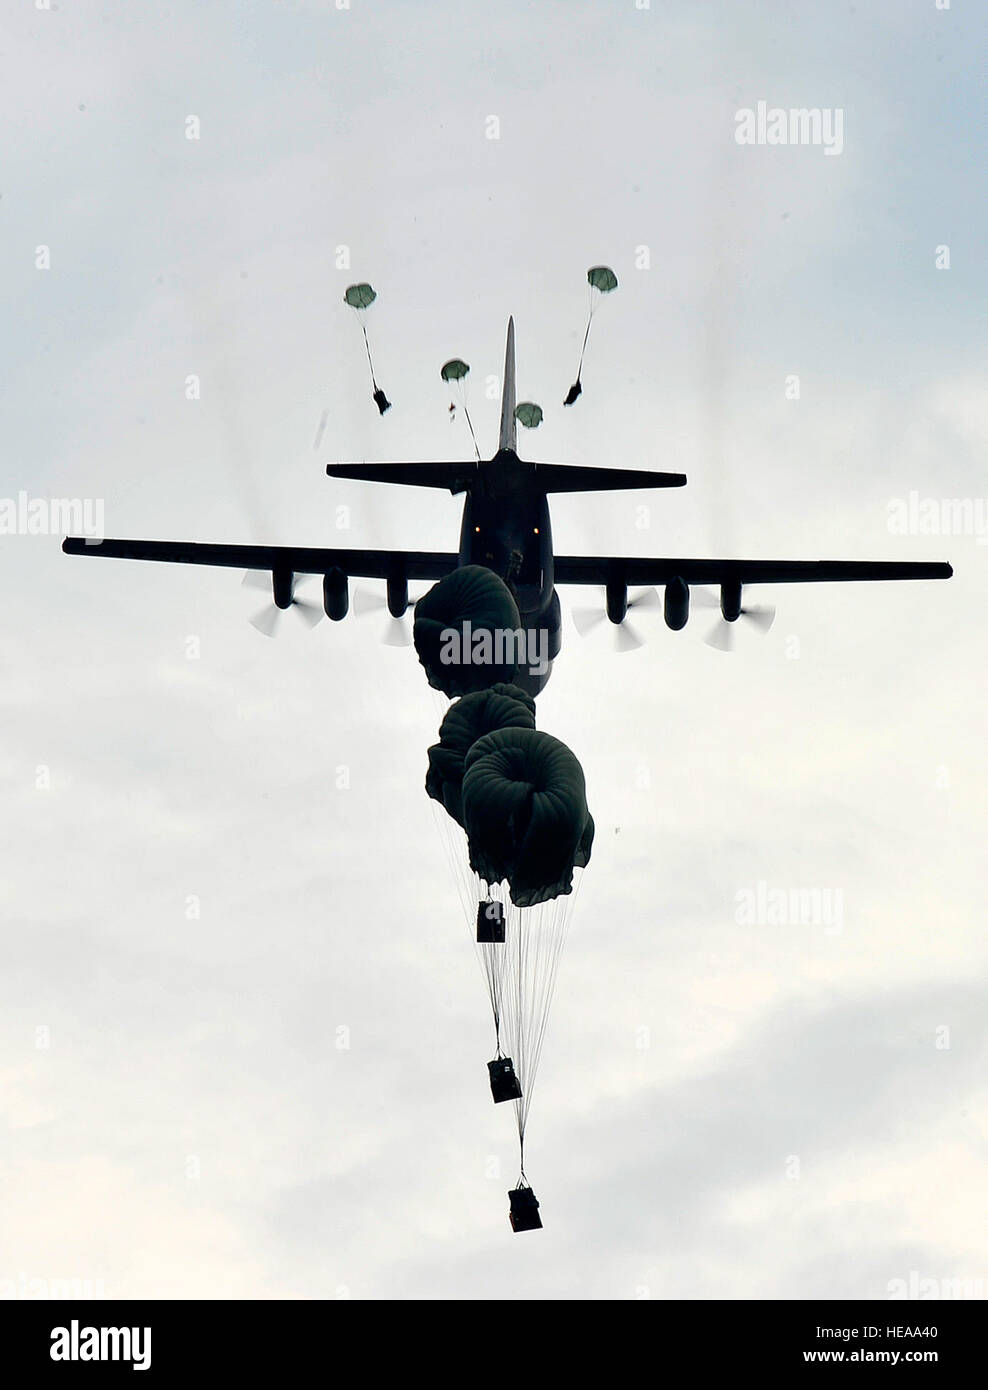 U.S. Air Force C-130 Hercules drops equipment belonging to the U.S. Army's 82nd Airborne Division onto Luzon drop zone during a training mission during Joint Operations Access Exercise 12-02 at Mackall Army Airfield , N.C., June 4, 2012. JOAX is a two-week forcible entry and ground combat exercise to prepare Air Force and Army service members to respond to worldwide crises and contingencies. Stock Photo